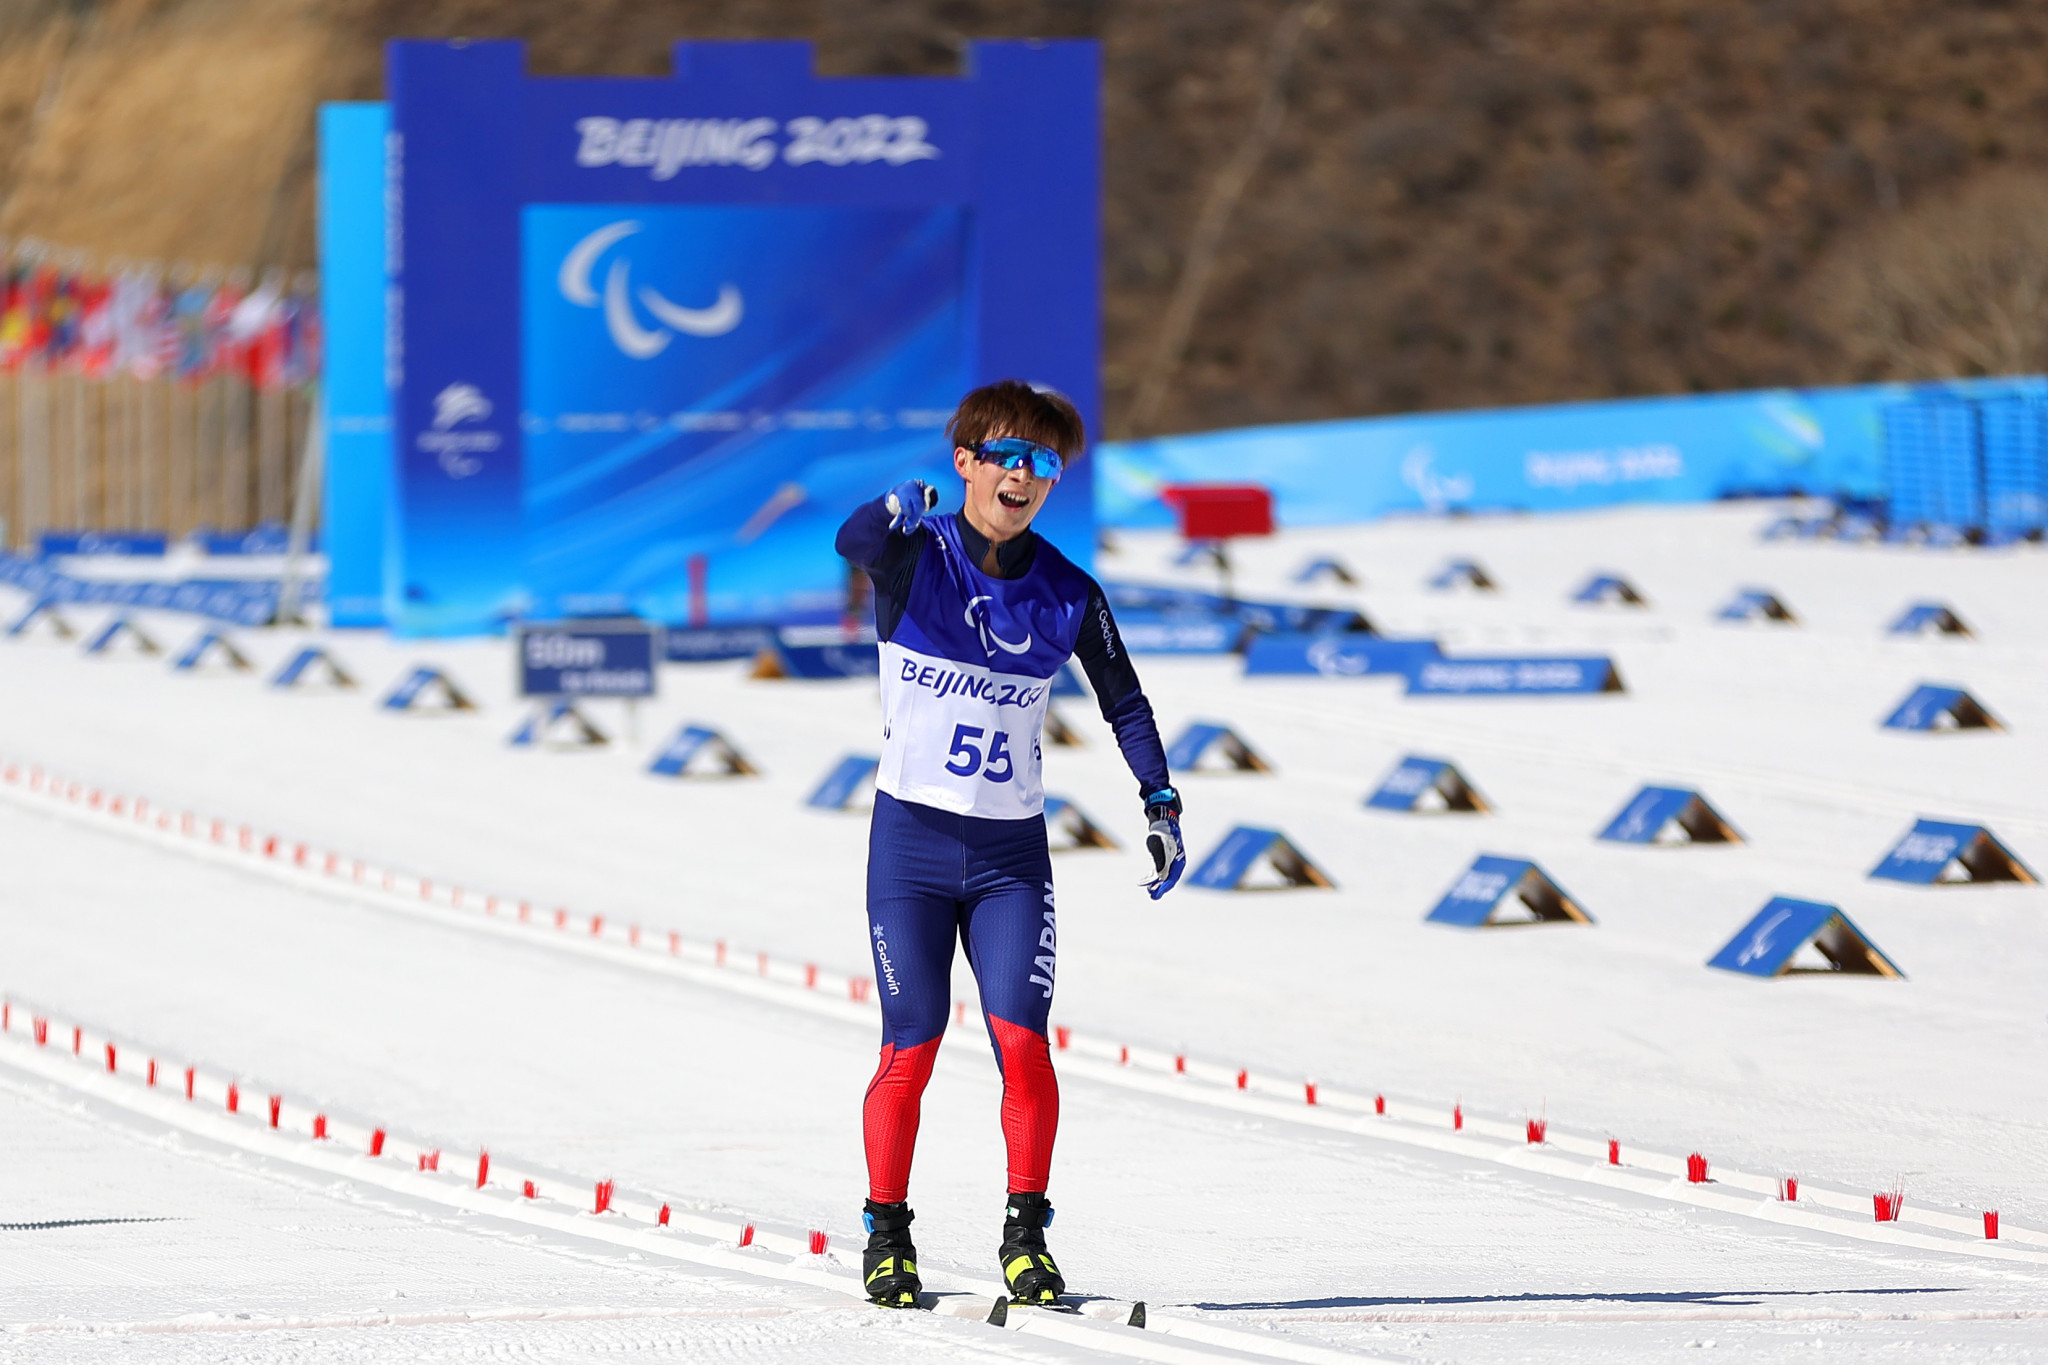 Japan's cross-country skier Taiki Kawayoke said he struggled in the "terrible heat" on day five of the Beijing 2022 Winter Paralympics ©Getty Images